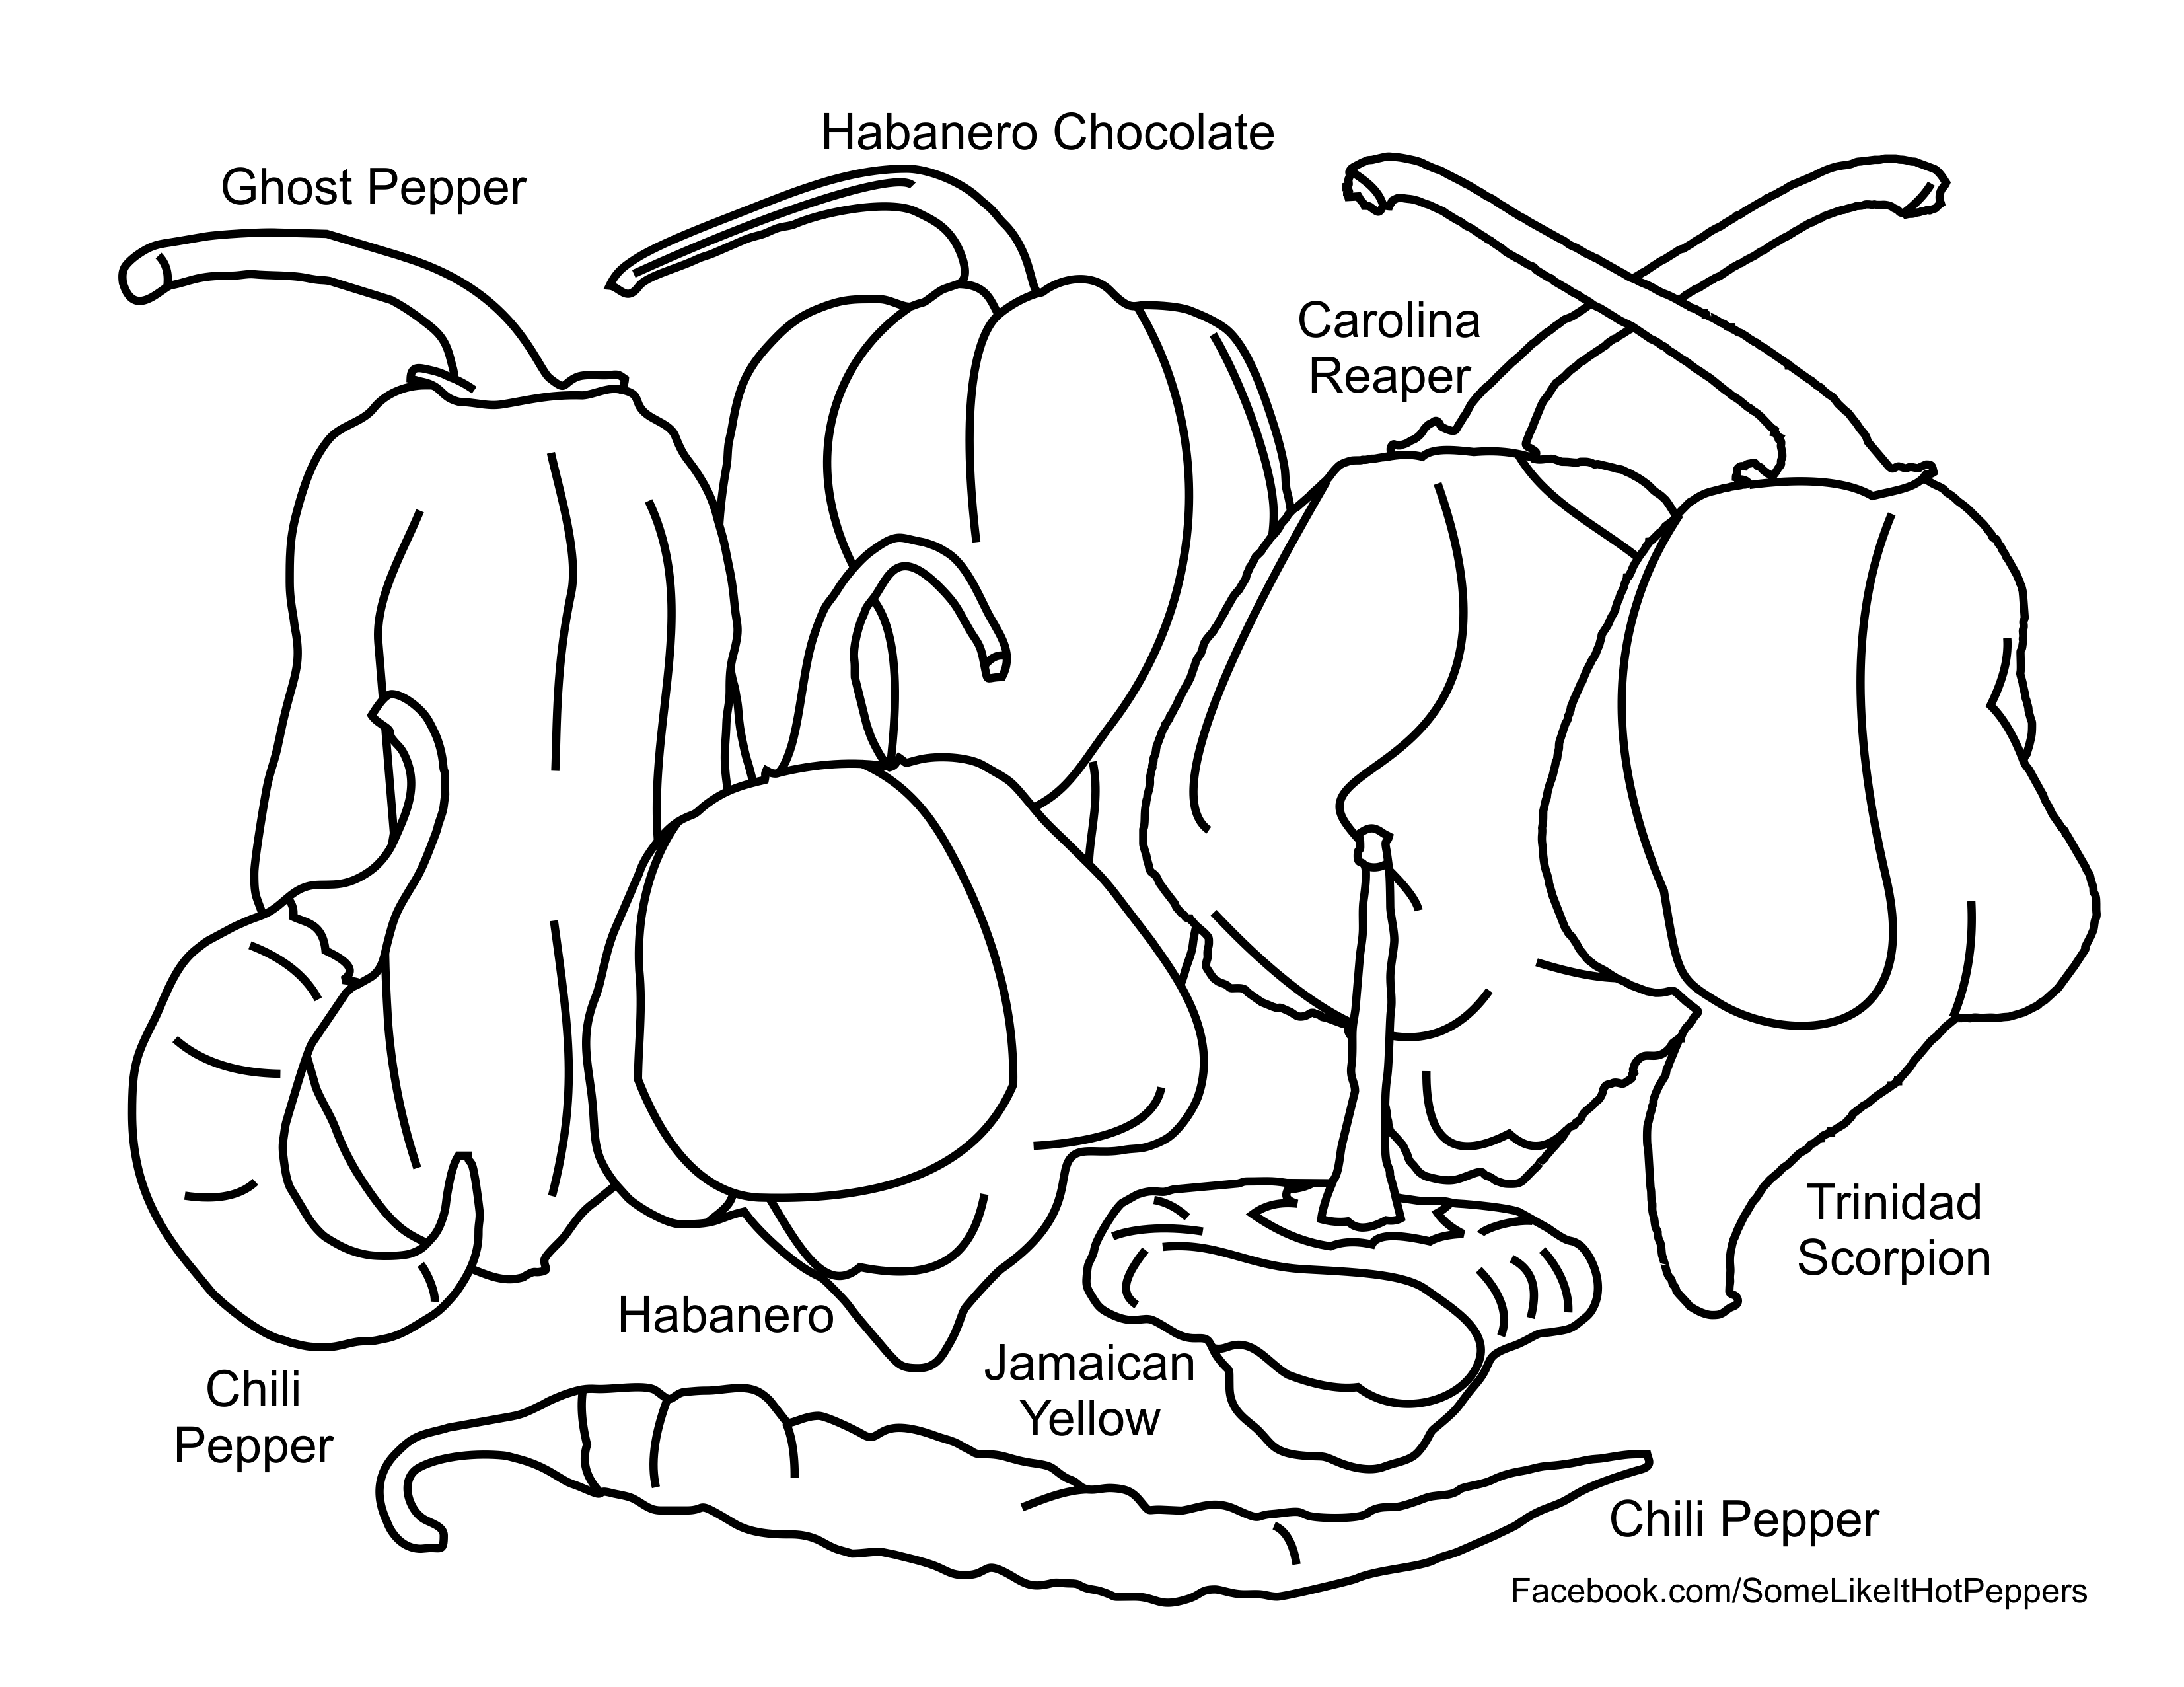 Hot pepper coloring page. | Stuffed peppers, Ghost peppers, Stuffed hot  peppers